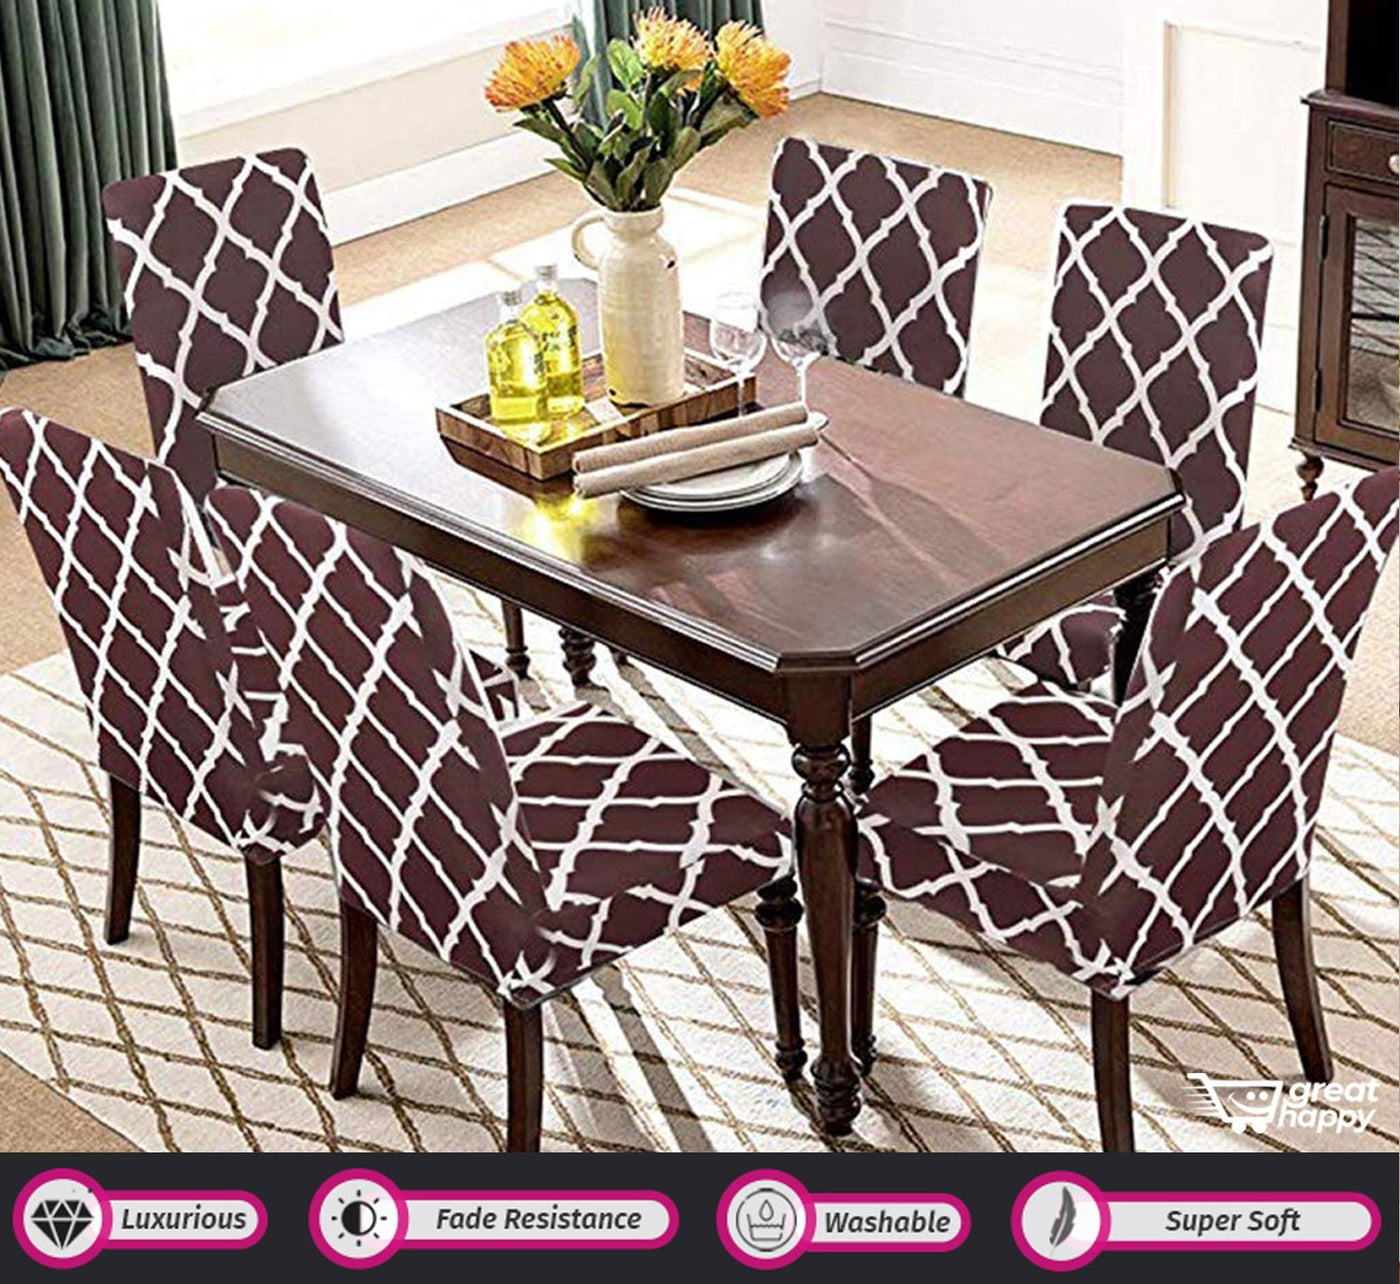 Premium Chair Cover - Stretchable & Elastic Fitted Great Happy IN Brown Diamond 2 PCS - ₹799 